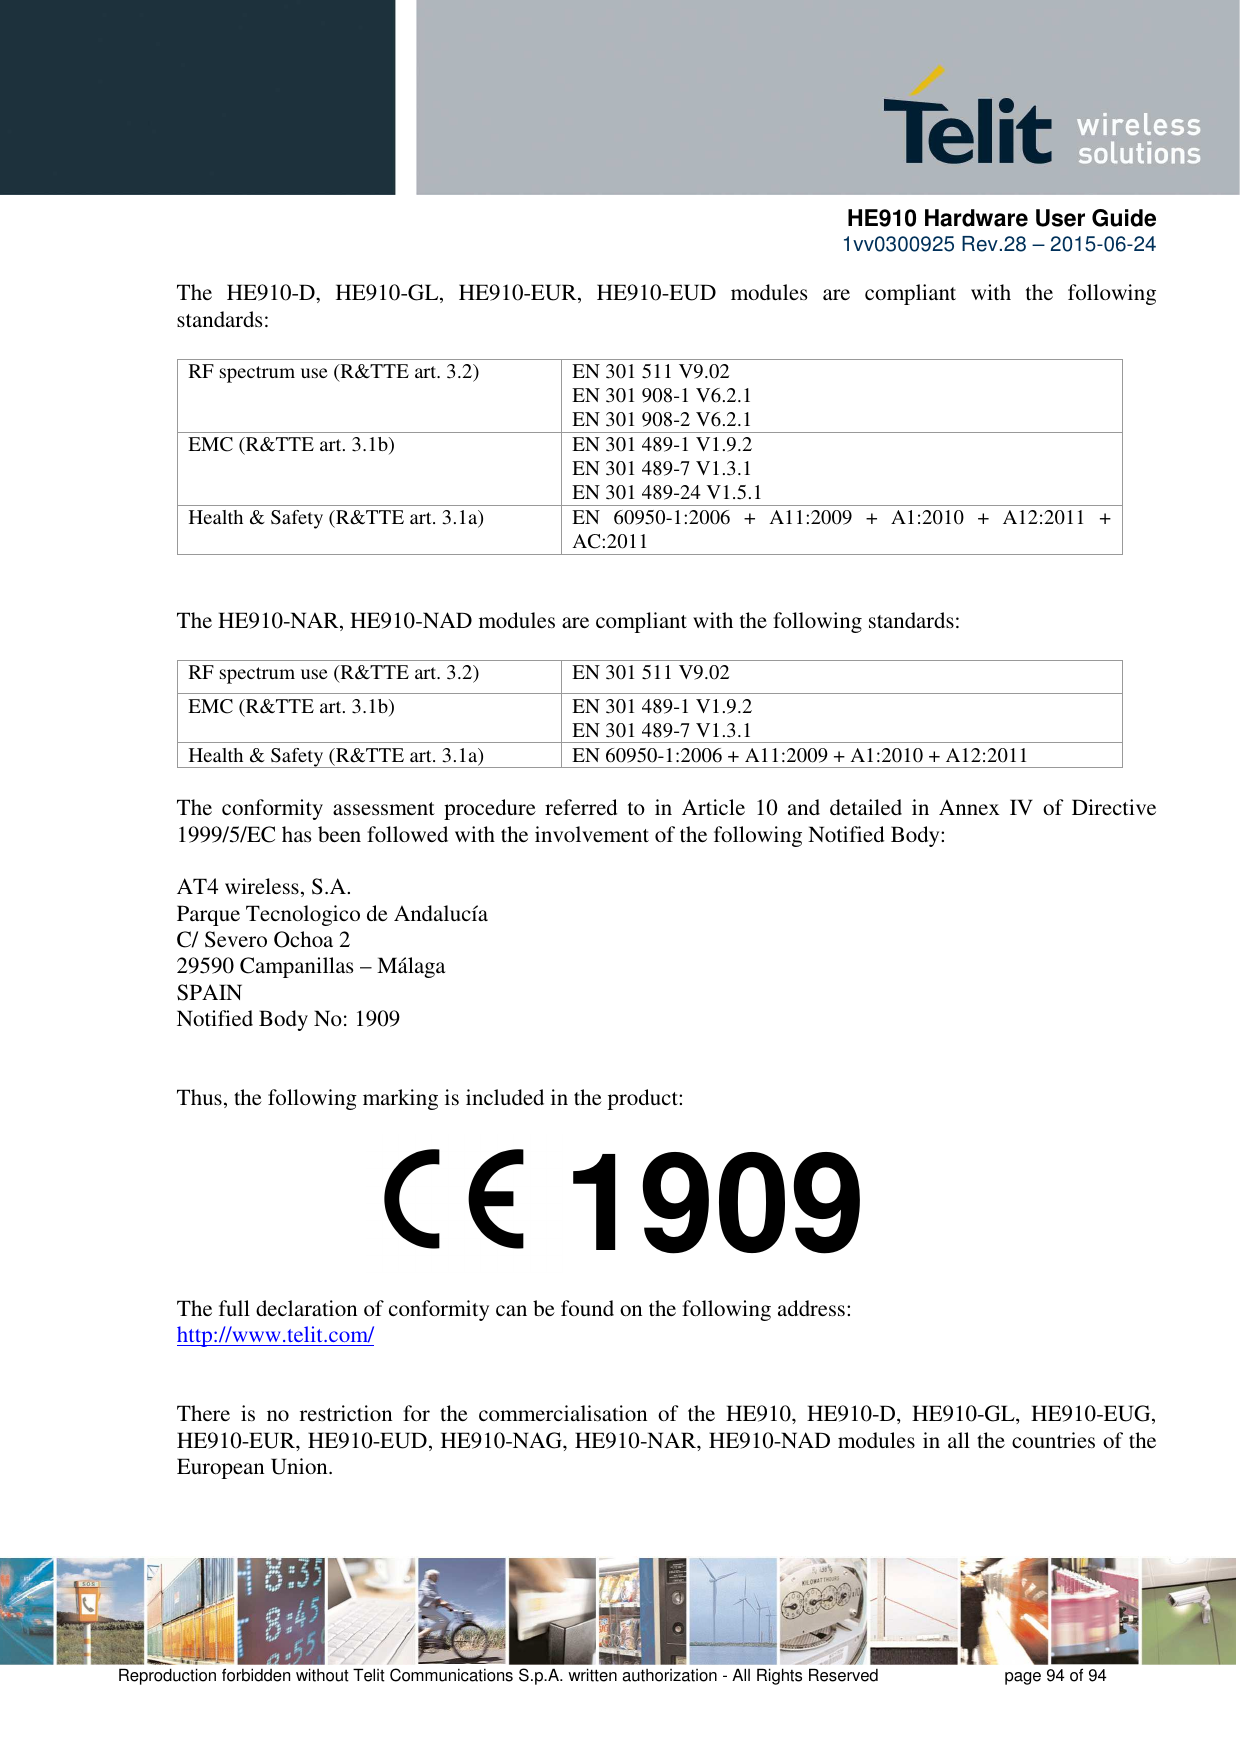      HE910 Hardware User Guide 1vv0300925 Rev.28 – 2015-06-24    Reproduction forbidden without Telit Communications S.p.A. written authorization - All Rights Reserved    page 94 of 94  The  HE910-D,  HE910-GL,  HE910-EUR,  HE910-EUD  modules  are  compliant  with  the  following standards:  RF spectrum use (R&amp;TTE art. 3.2)  EN 301 511 V9.02 EN 301 908-1 V6.2.1 EN 301 908-2 V6.2.1 EMC (R&amp;TTE art. 3.1b)  EN 301 489-1 V1.9.2 EN 301 489-7 V1.3.1 EN 301 489-24 V1.5.1 Health &amp; Safety (R&amp;TTE art. 3.1a)  EN  60950-1:2006  +  A11:2009  +  A1:2010  +  A12:2011  + AC:2011   The HE910-NAR, HE910-NAD modules are compliant with the following standards:  RF spectrum use (R&amp;TTE art. 3.2)  EN 301 511 V9.02 EMC (R&amp;TTE art. 3.1b)  EN 301 489-1 V1.9.2 EN 301 489-7 V1.3.1 Health &amp; Safety (R&amp;TTE art. 3.1a)  EN 60950-1:2006 + A11:2009 + A1:2010 + A12:2011  The  conformity  assessment  procedure  referred  to  in  Article  10  and  detailed  in  Annex  IV  of  Directive 1999/5/EC has been followed with the involvement of the following Notified Body:  AT4 wireless, S.A. Parque Tecnologico de Andalucía C/ Severo Ochoa 2 29590 Campanillas – Málaga SPAIN Notified Body No: 1909   Thus, the following marking is included in the product:        The full declaration of conformity can be found on the following address: http://www.telit.com/   There  is  no  restriction  for  the  commercialisation  of  the  HE910,  HE910-D,  HE910-GL,  HE910-EUG, HE910-EUR, HE910-EUD, HE910-NAG, HE910-NAR, HE910-NAD modules in all the countries of the European Union.   1909 